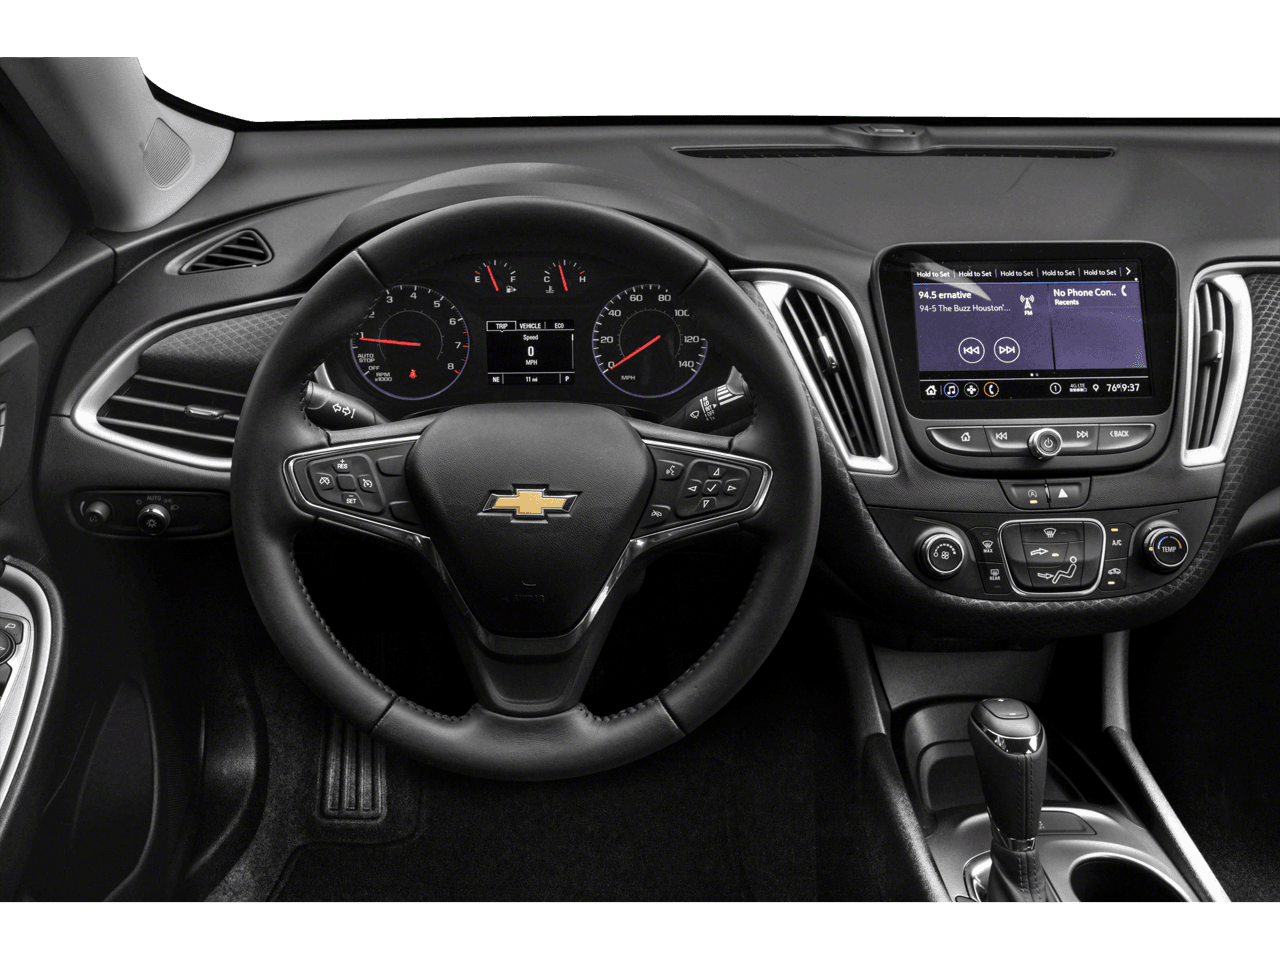 2022 Chevrolet Malibu Photo in Wooster, OH 44691